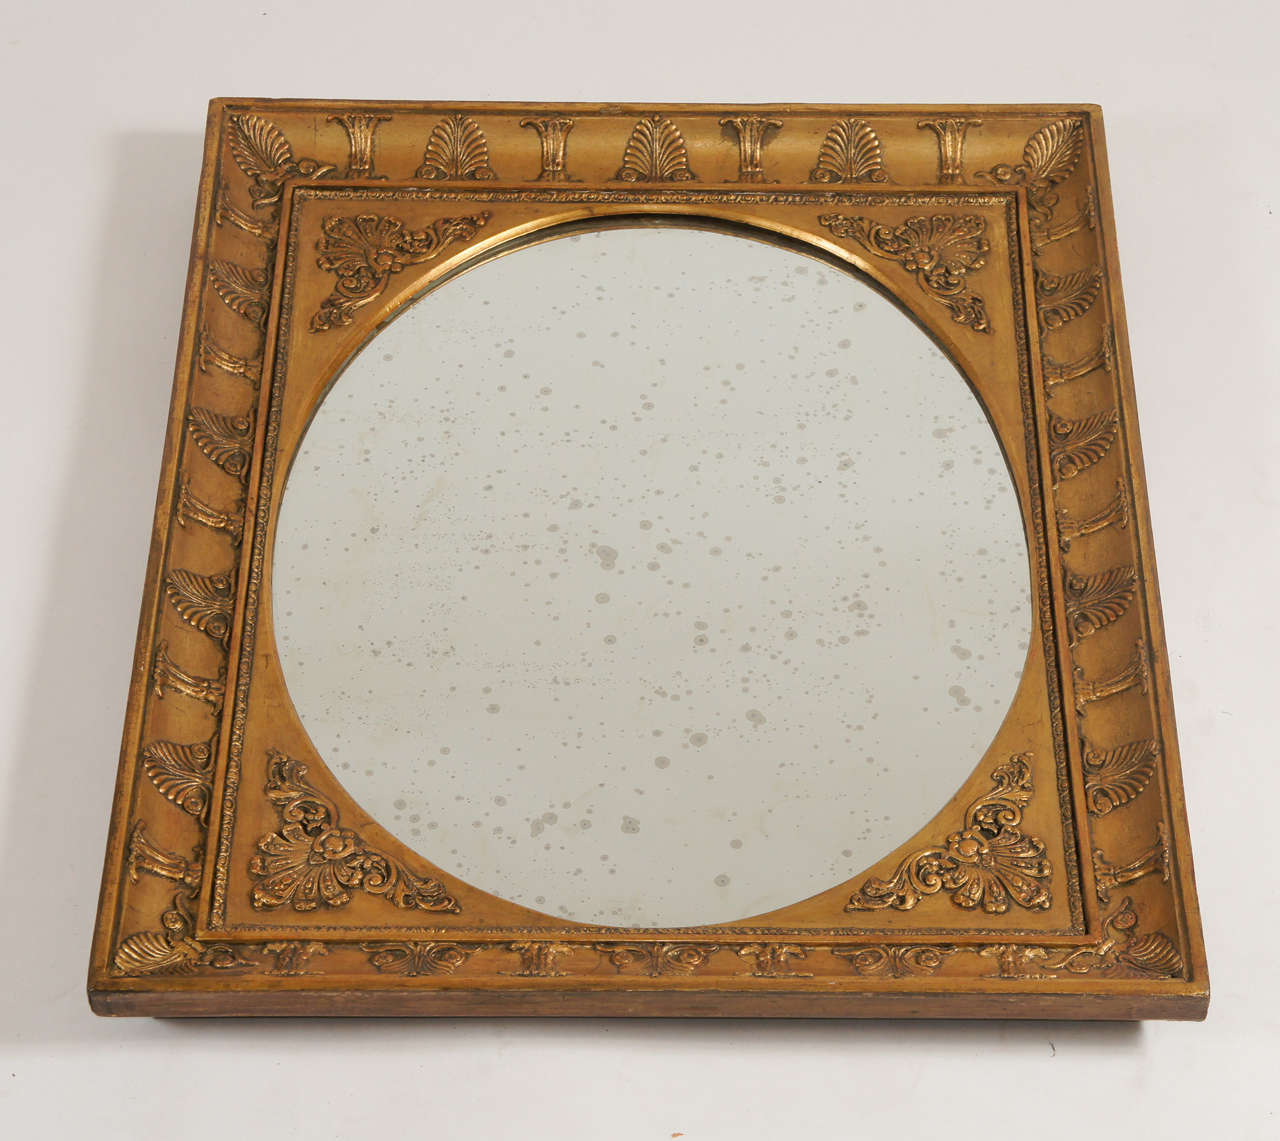 French neoclassical Empire / Charles X style giltwood mirror or looking glass of rectangular form having central oval mirror glass reserve with fillet having corner foliate motifs and frame with alternating palmette and gathered stalk design.